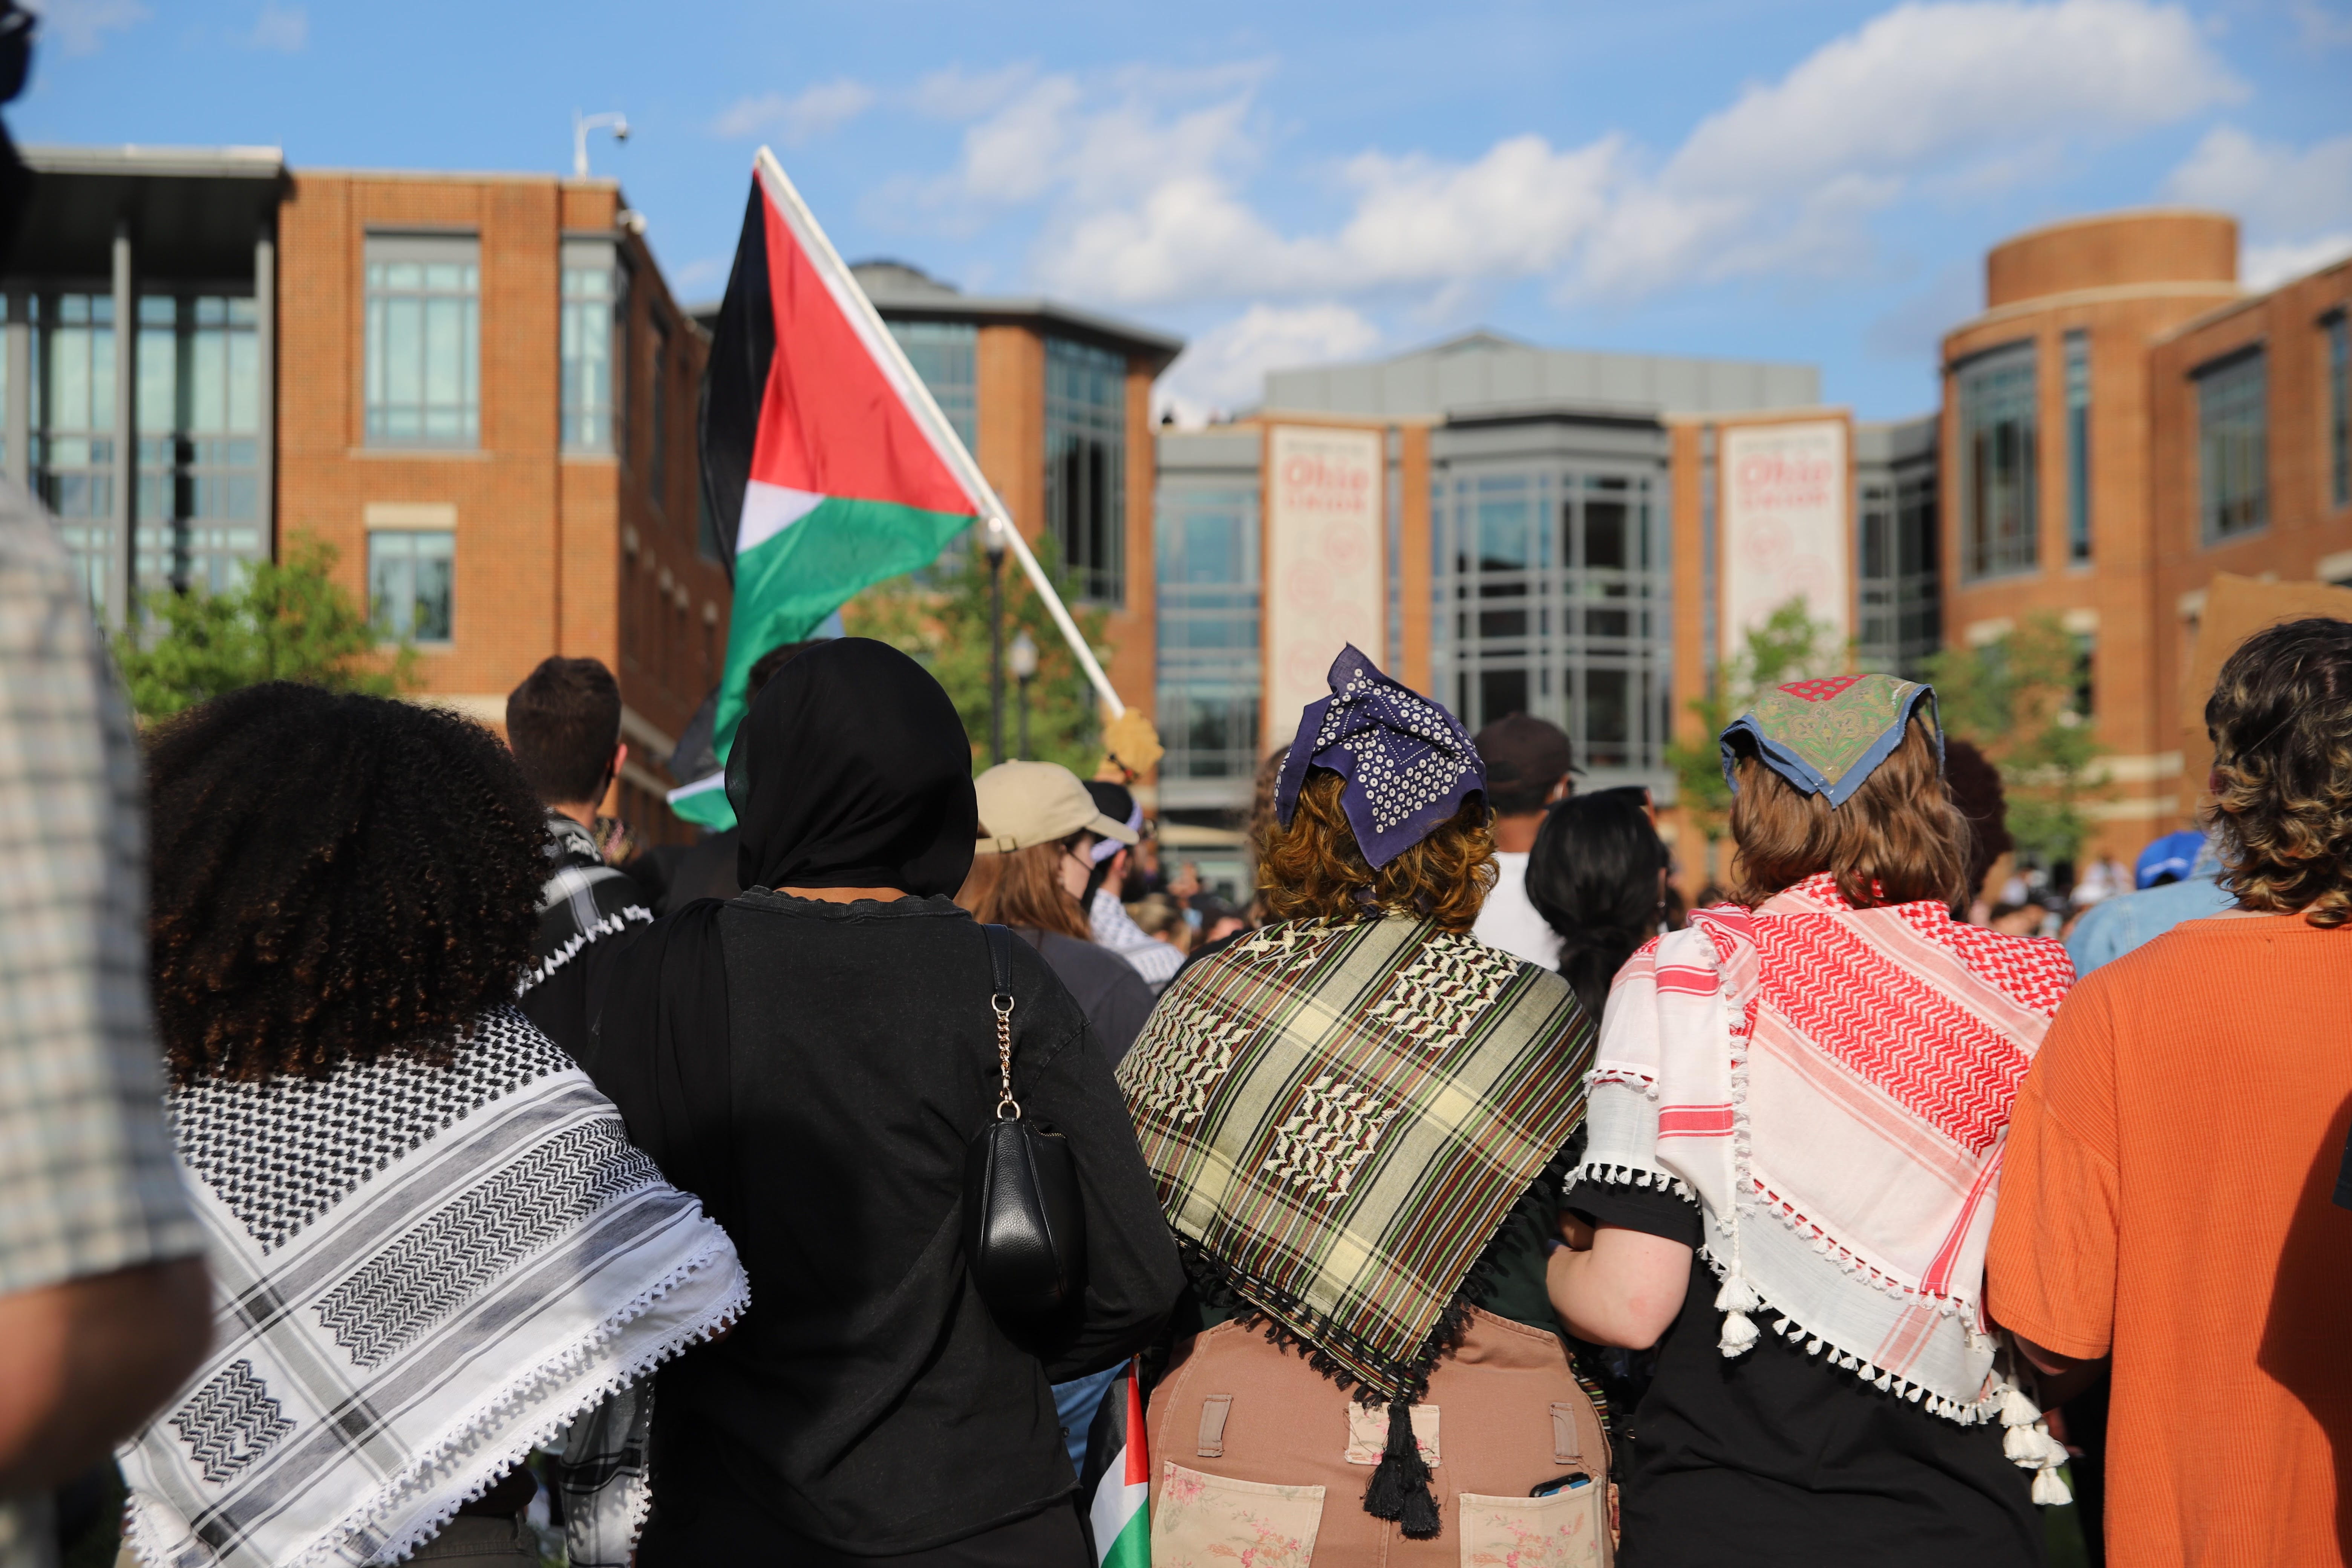 A pro-Palestinian protest took place on the South Oval on Wednesday. Credit: Carly Jo Damon | Assistant Photo Editor